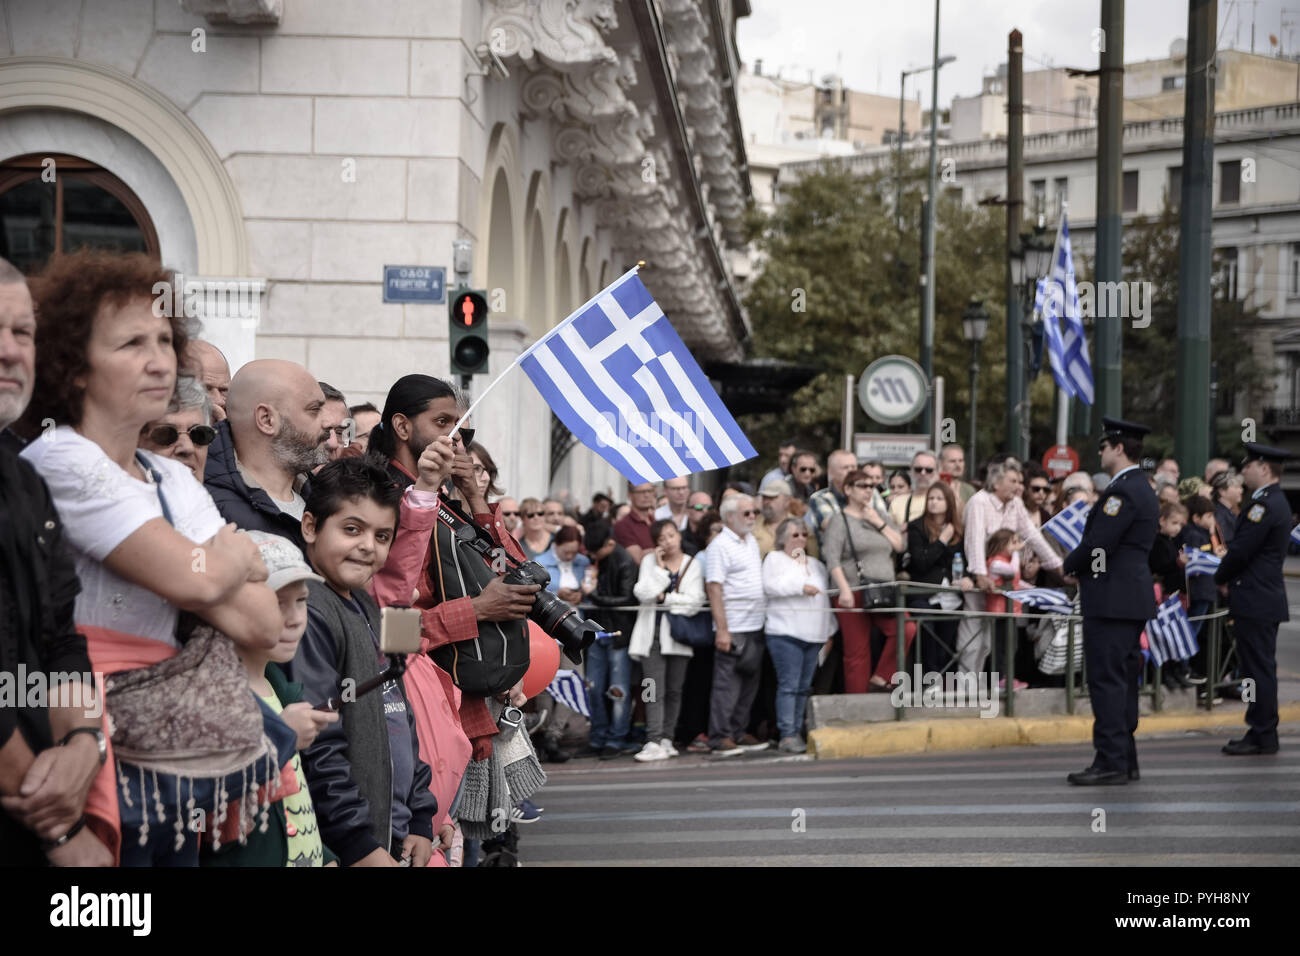 People are seen watching the student parade during the celebrations. The national 'Oxi (No) Day' commemorates the rejection by Greek Prime Minister Ioannis Metaxas of the ultimatum made by the Italian dictator Benito Mussolini on 28 October 1940 during World War II.  It is celebrated yearly by Greek communities around the world, in Greece and Cyprus. After World War II it became a public holiday in Greece and Cyprus and the event is commemorated every year with military and student parades. On every anniversary, most public buildings and residences are decorated with Greek flags. Stock Photo